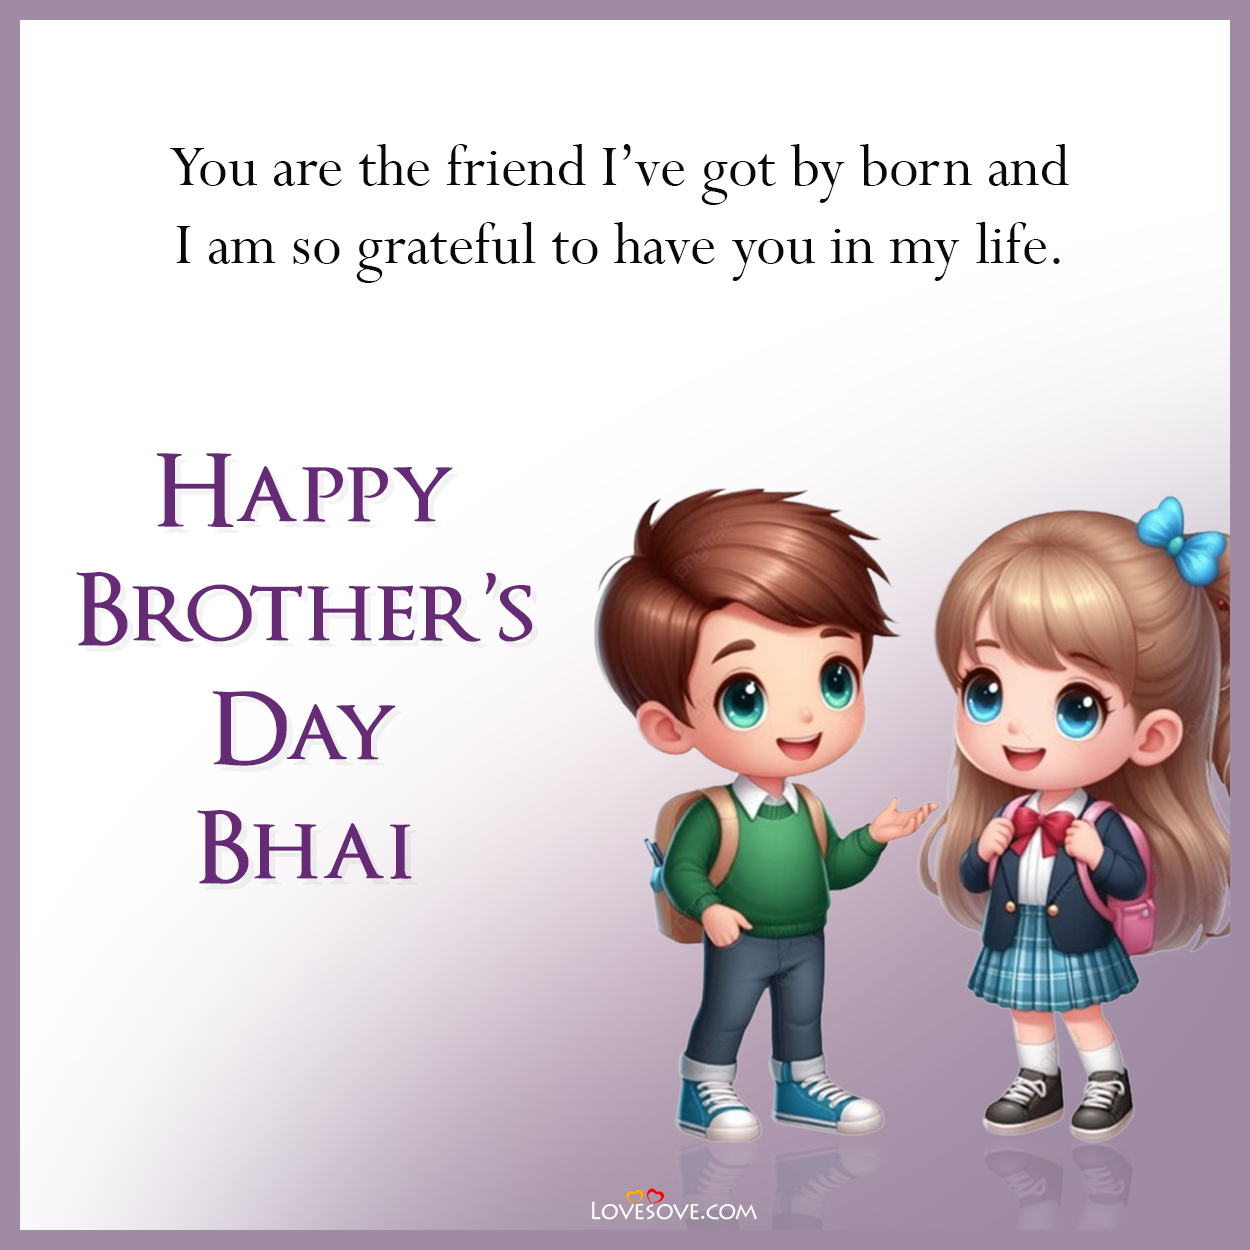 national brother's day wishes, brother's day quotes